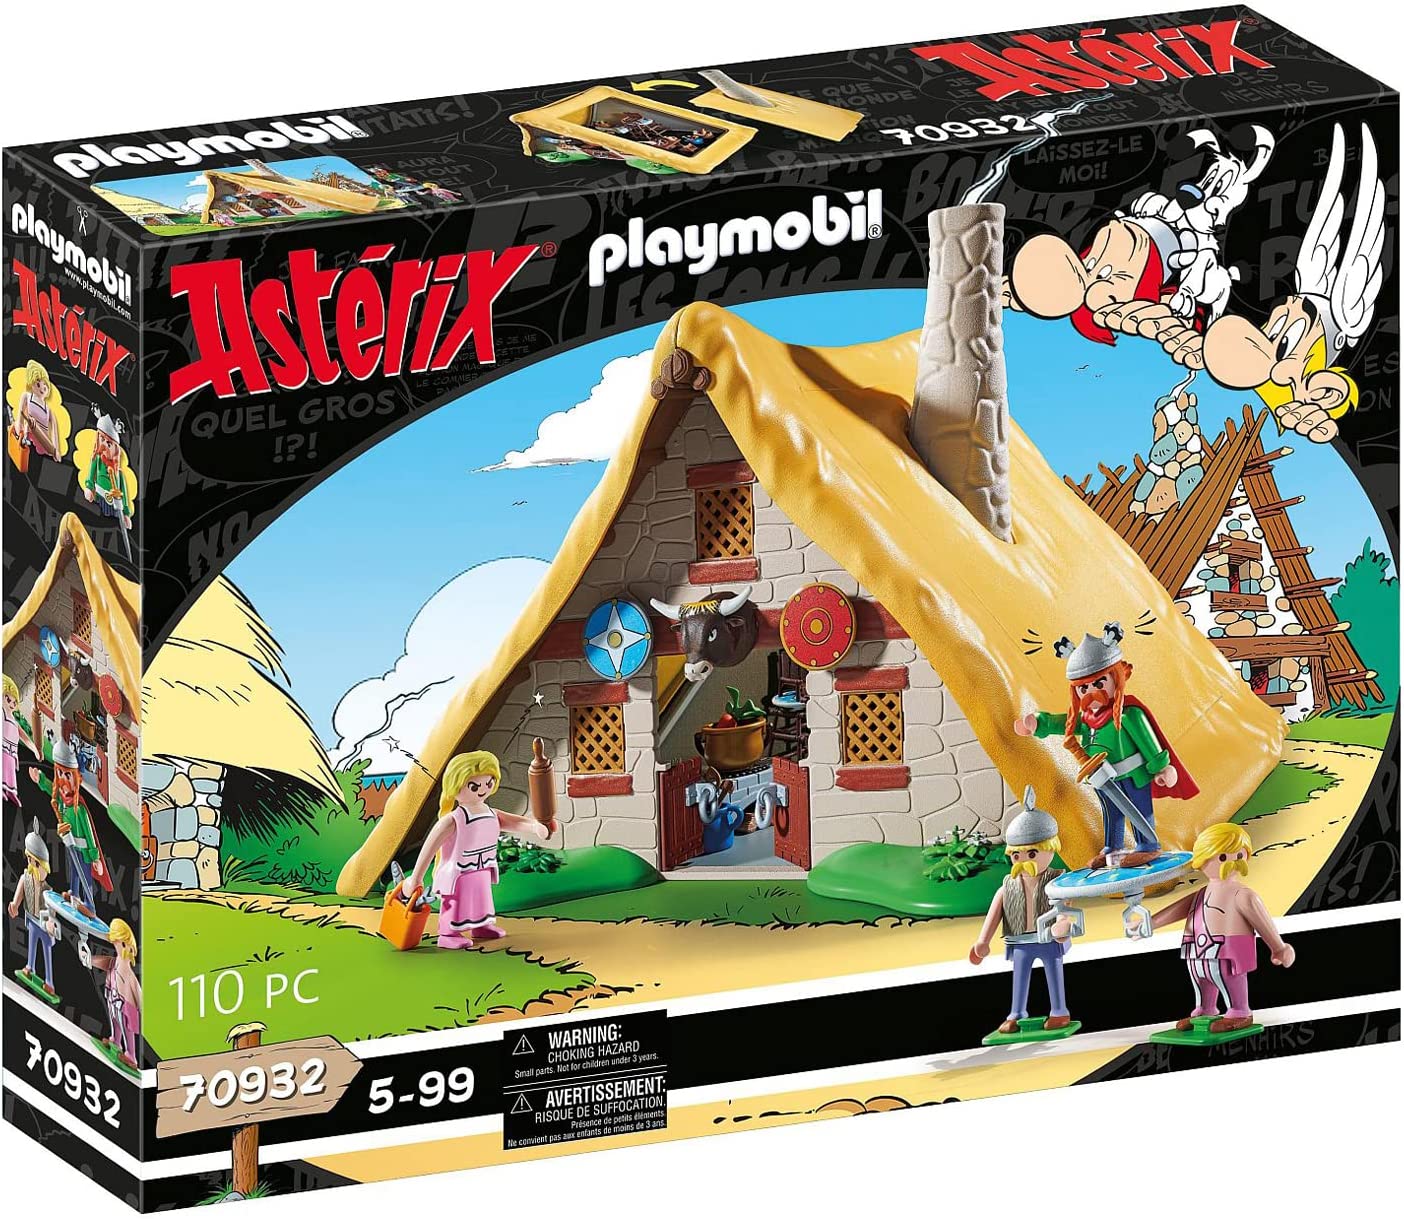 PLAYMOBIL Asterix 70932 Majestix Hut Toy for Children Aged 5 Years and Up